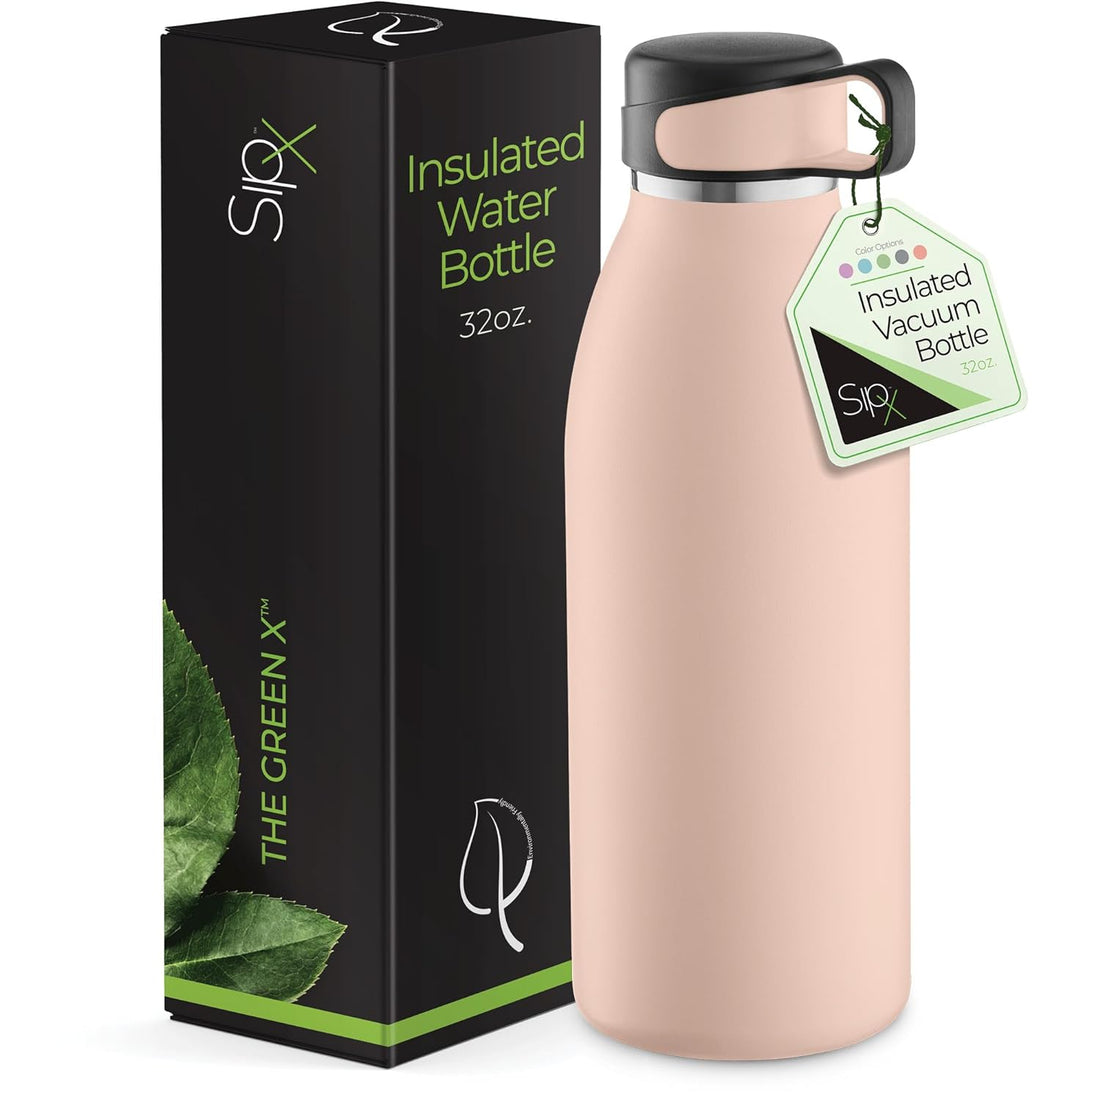 SipX™ Triple-Insulated Stainless Steel Water Bottle - 32oz. With Cover Lid, BPA-Free Reusable Insulated Water Bottle Keeps Cold For 24 Hours, Metal Water Bottle Made Of Sustainable Material For Hiking